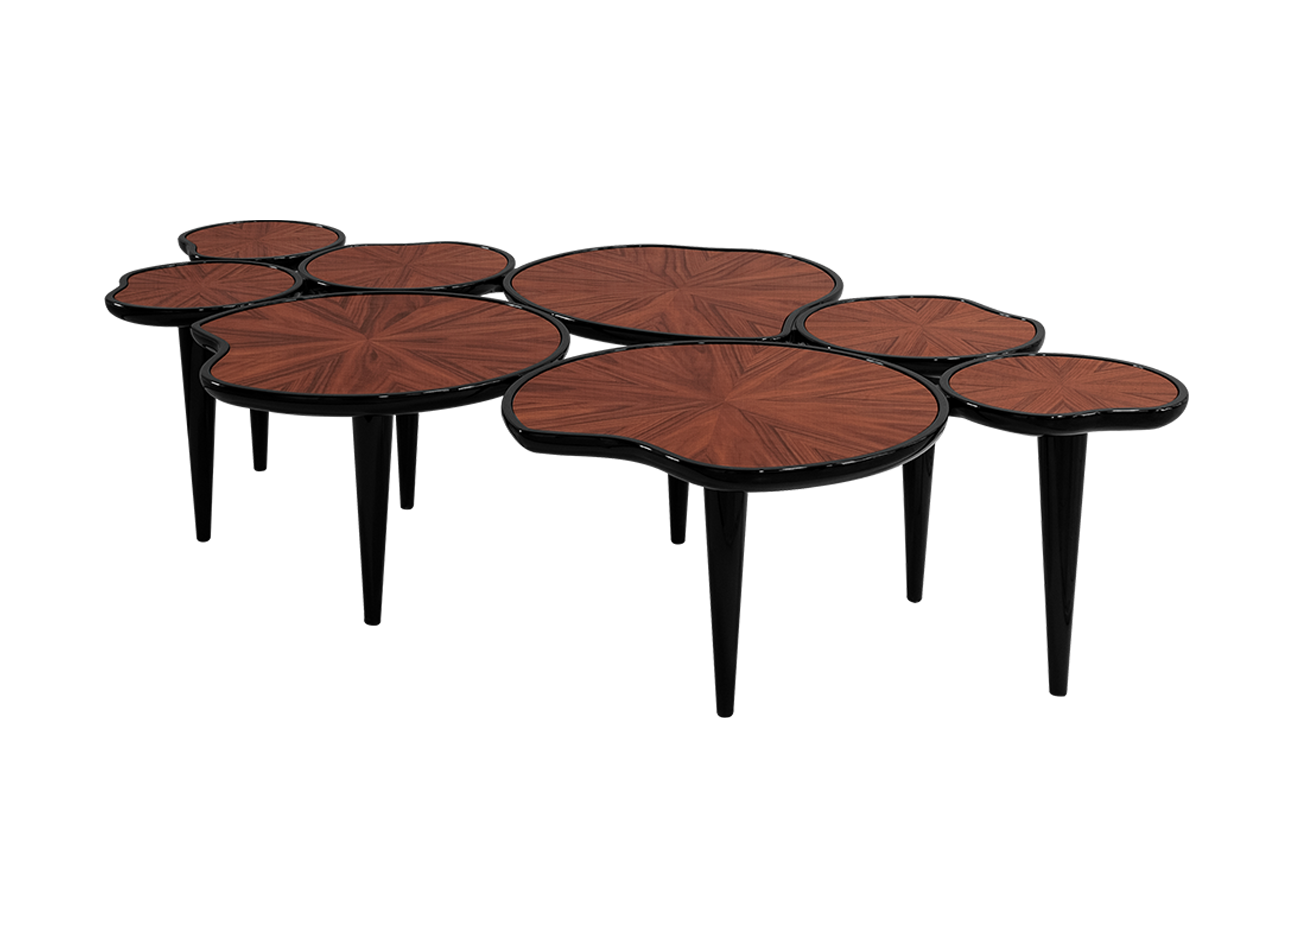 Waterlily center table